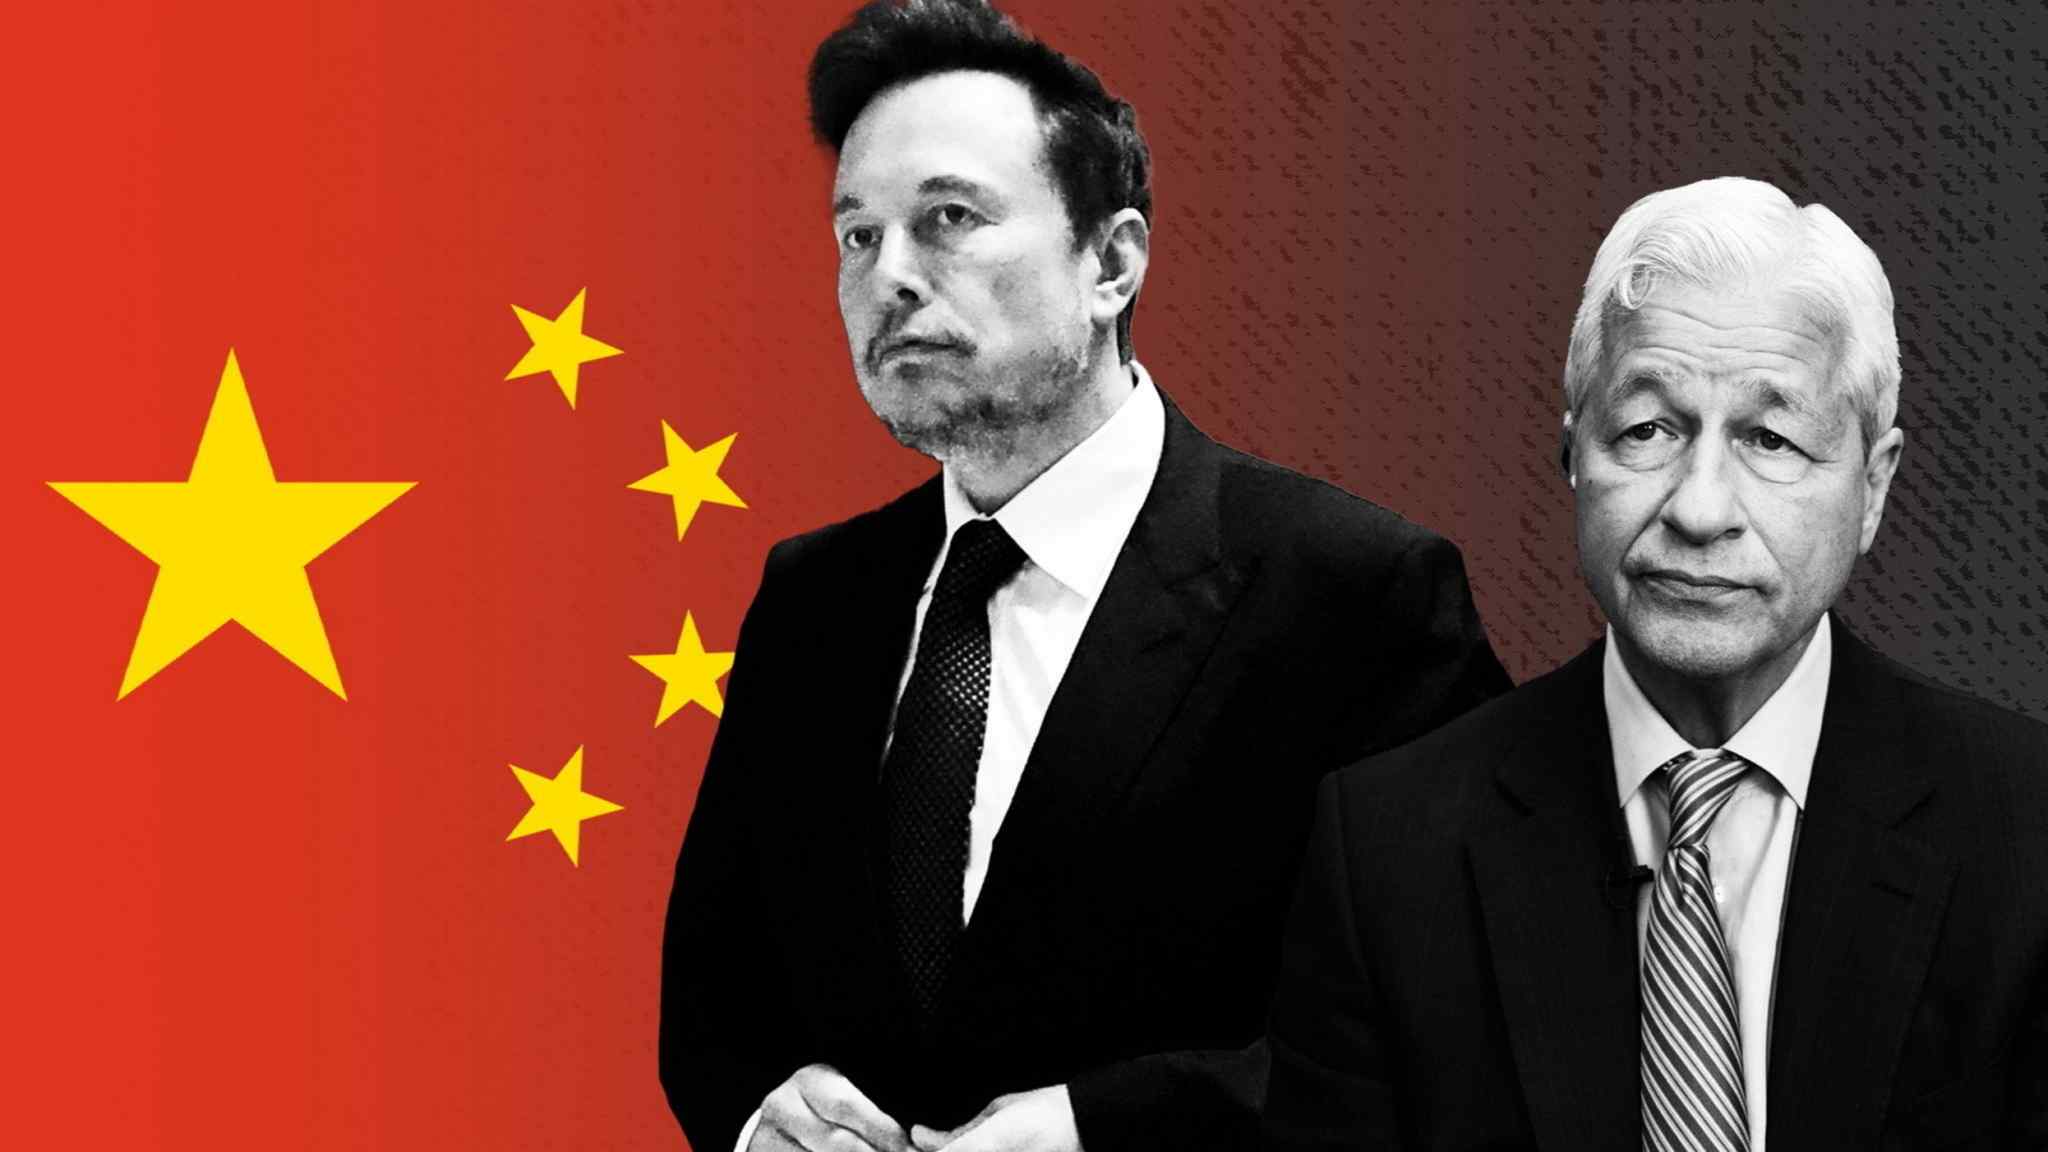 Musk and Dimon lead corporate charge to Beijing as ties with US fray